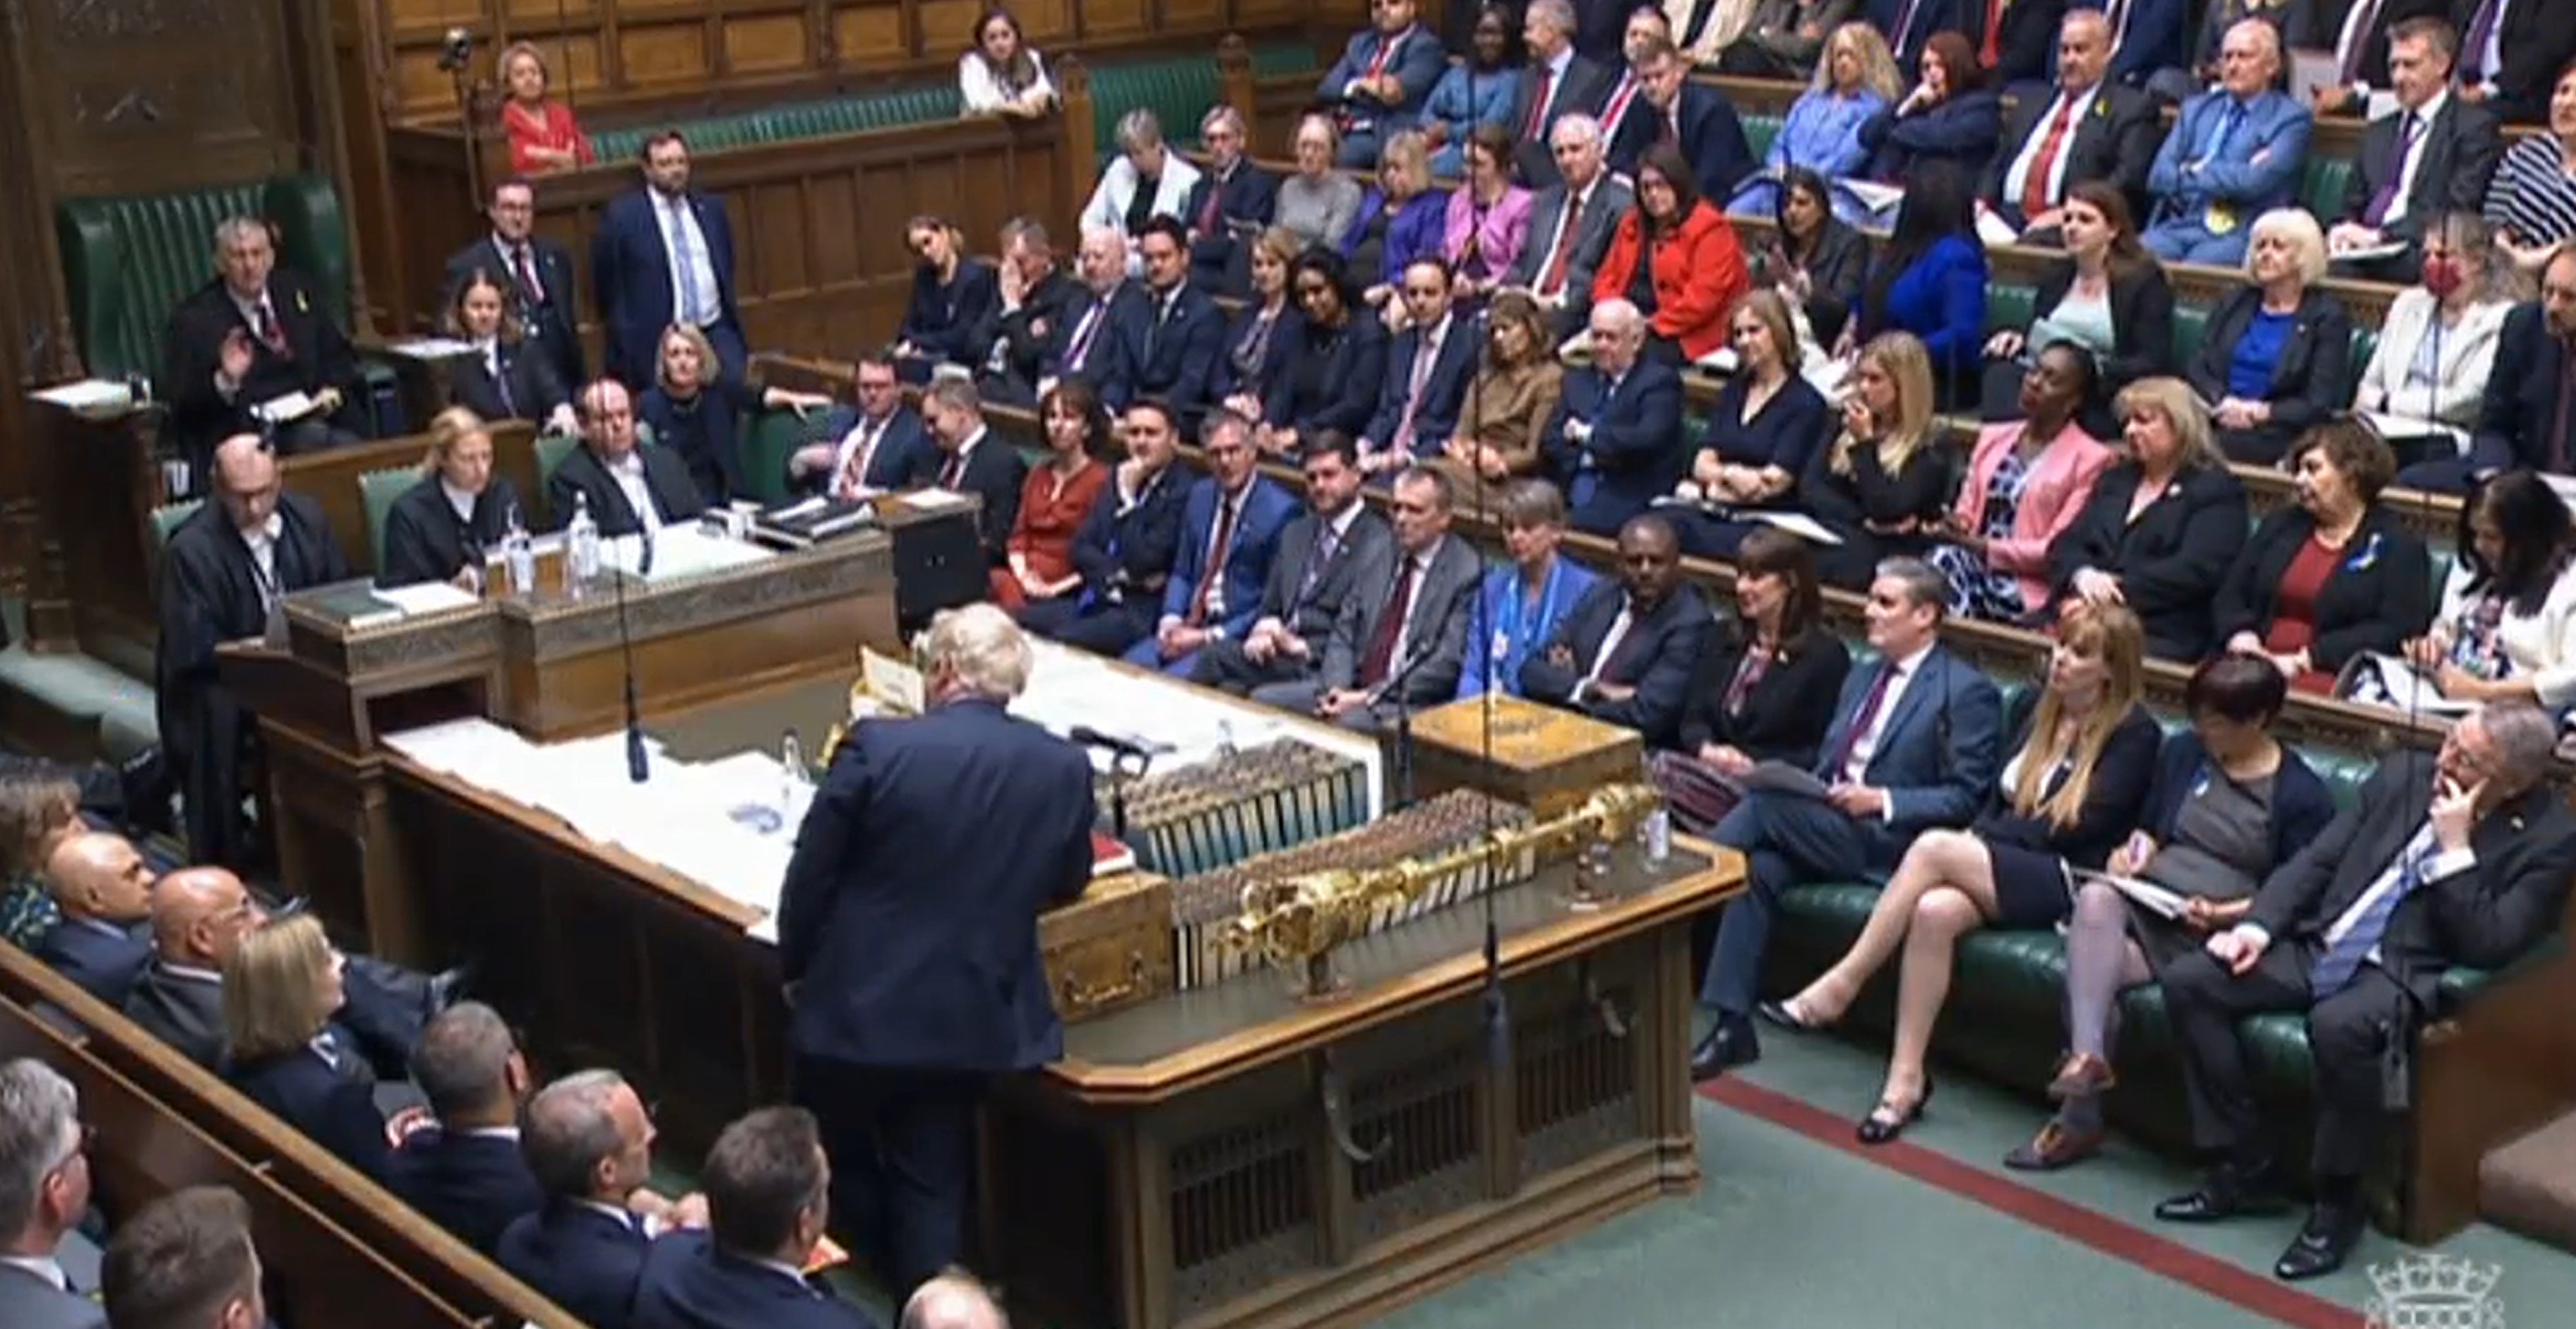 As deputy opposition leader, Angela Rayner sits opposite Boris Johnson in the Commons during Prime Minister’s Questions (House of Commons/PA)